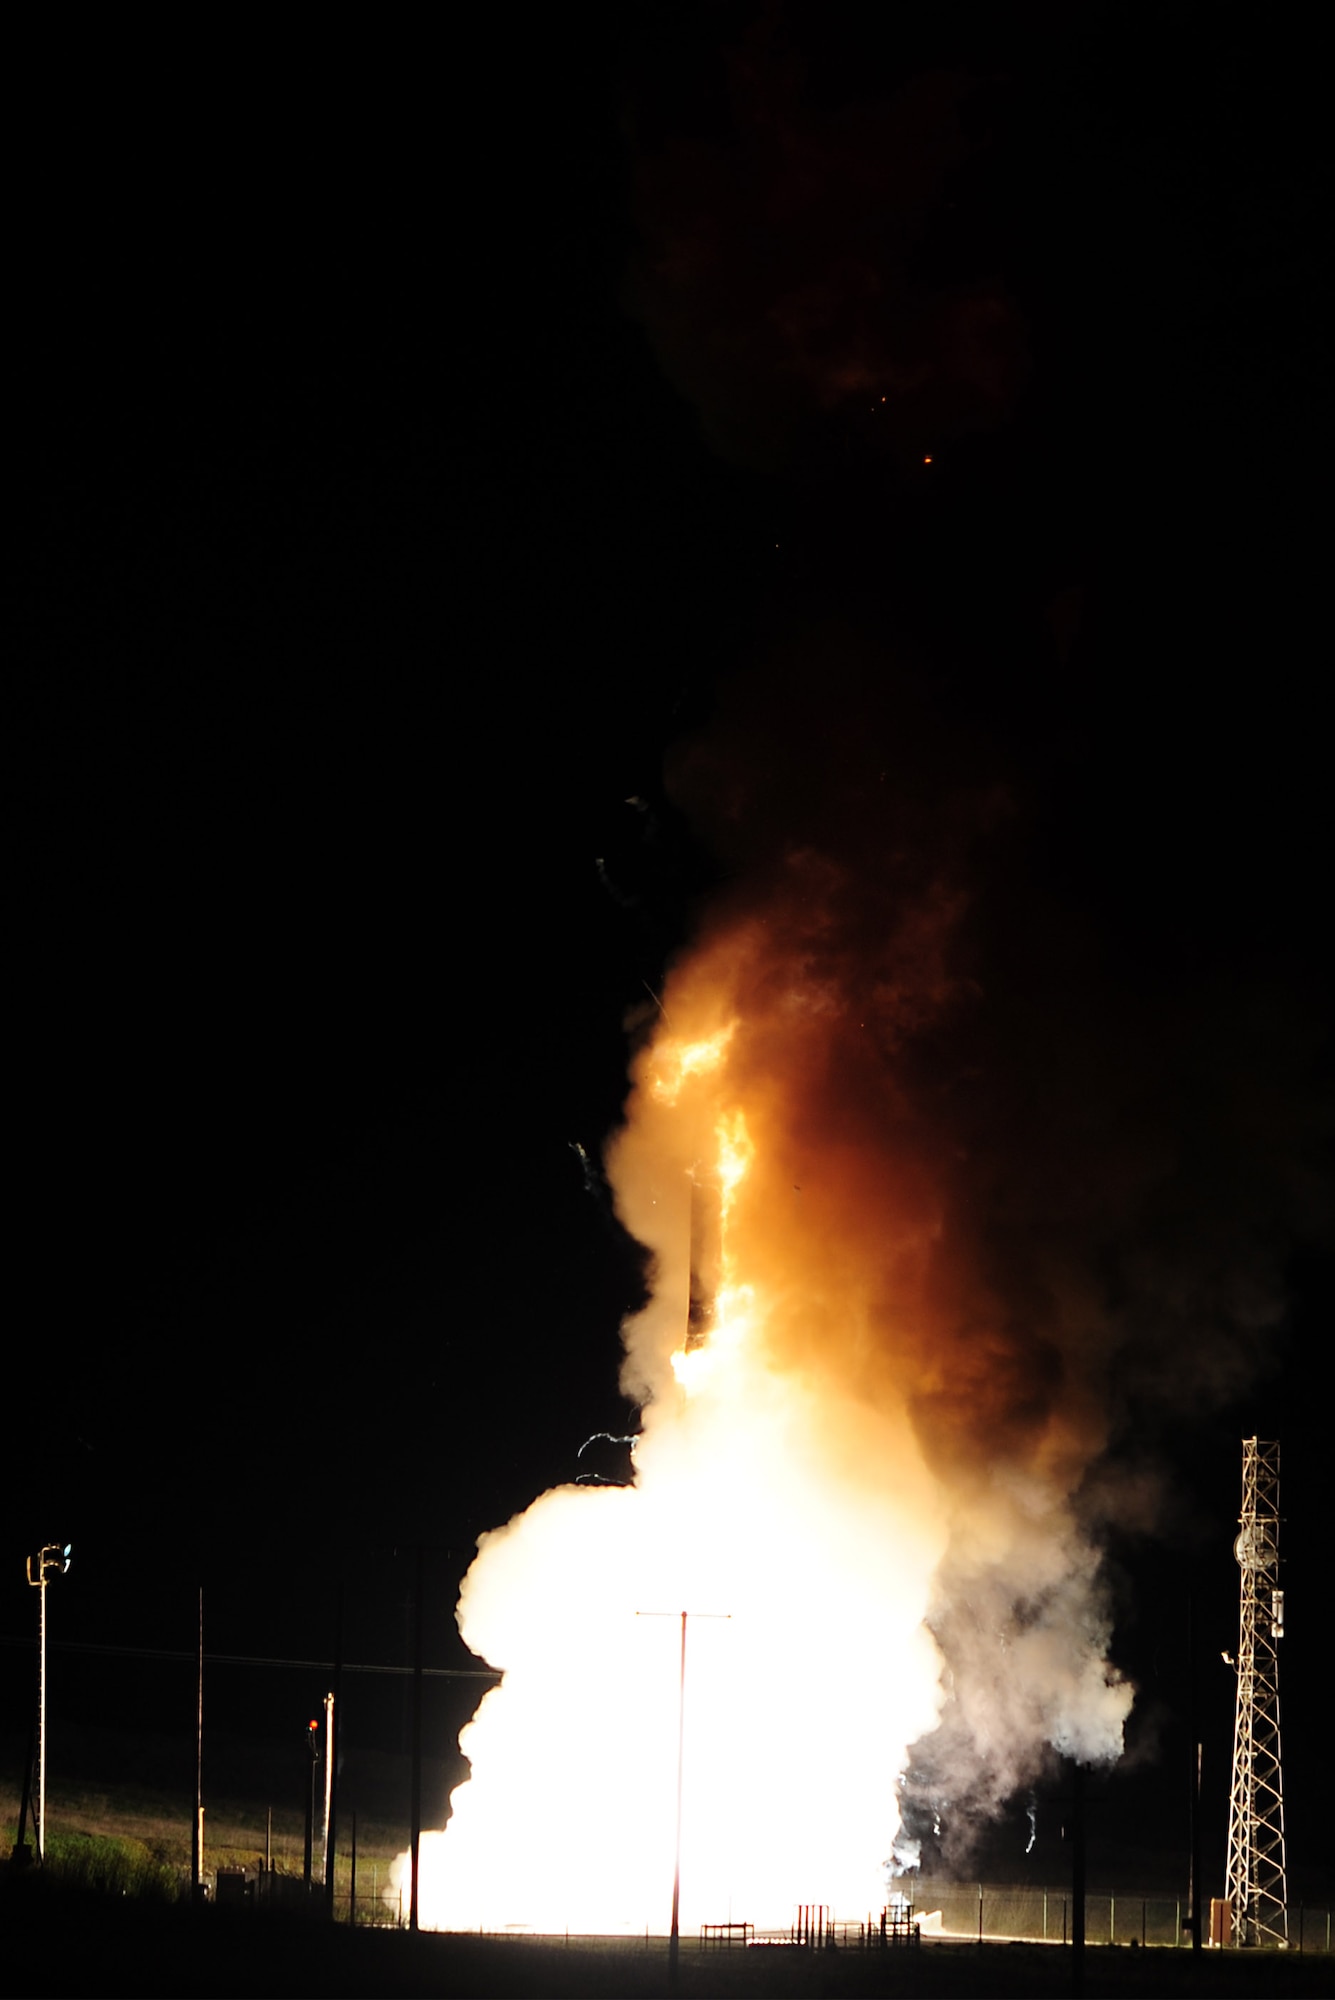 An Air Force Global Strike Command unarmed Minuteman III intercontinental ballistic missile launches during an operation test at 11:49 p.m. PT Feb. 23, 2021, at Vandenberg Air Force Base, Calif.